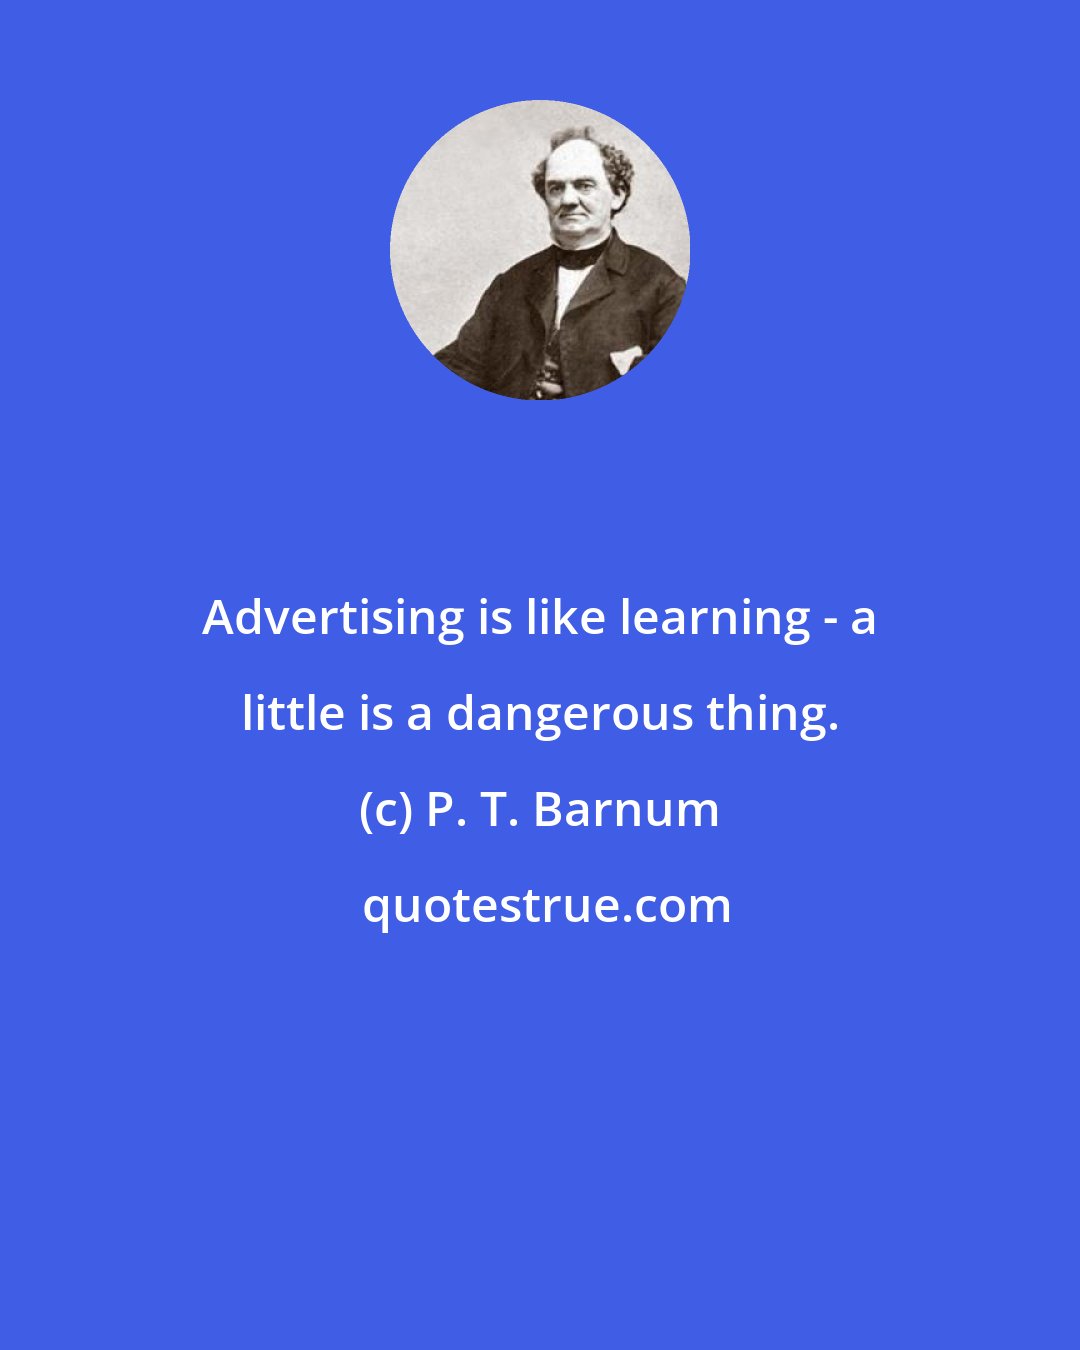 P. T. Barnum: Advertising is like learning - a little is a dangerous thing.